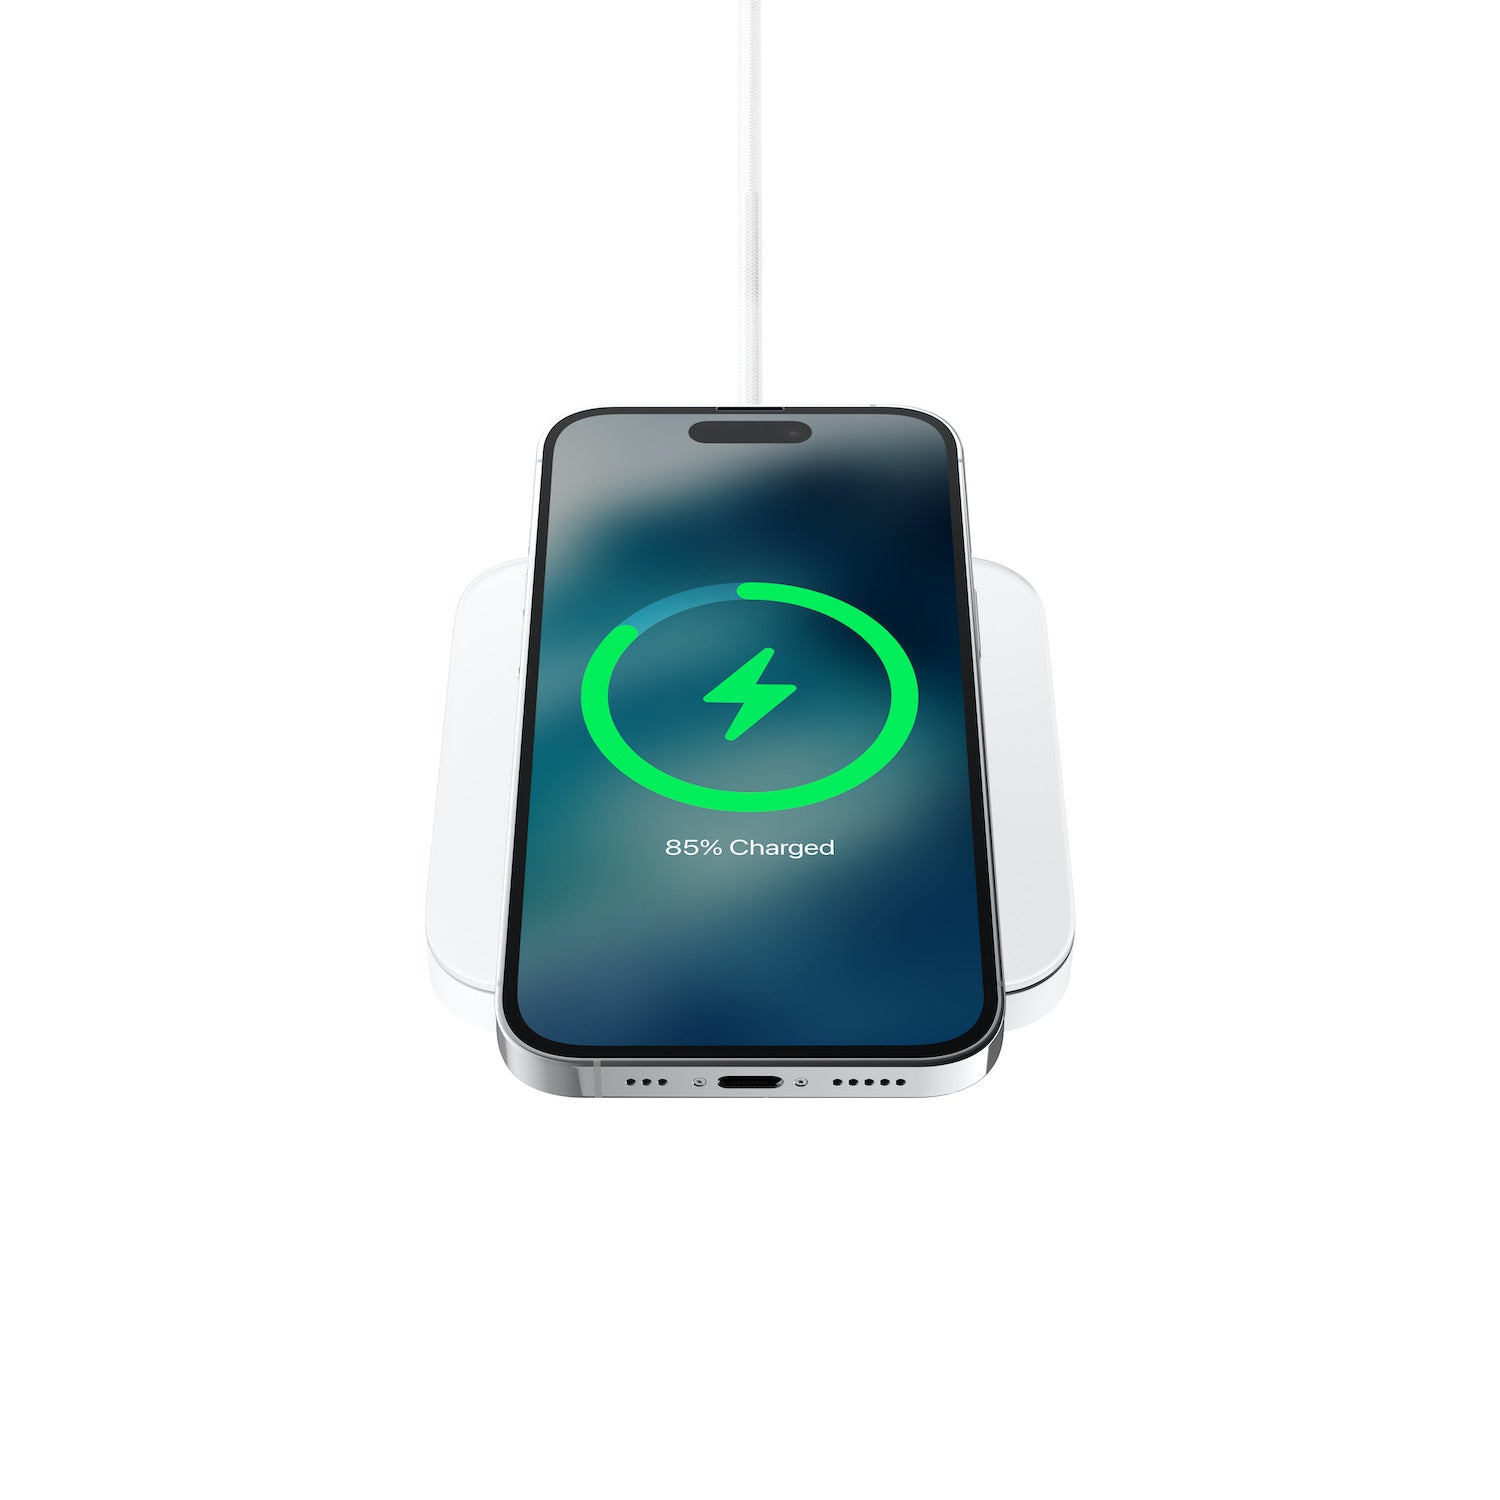 Base - Wireless Charger - White